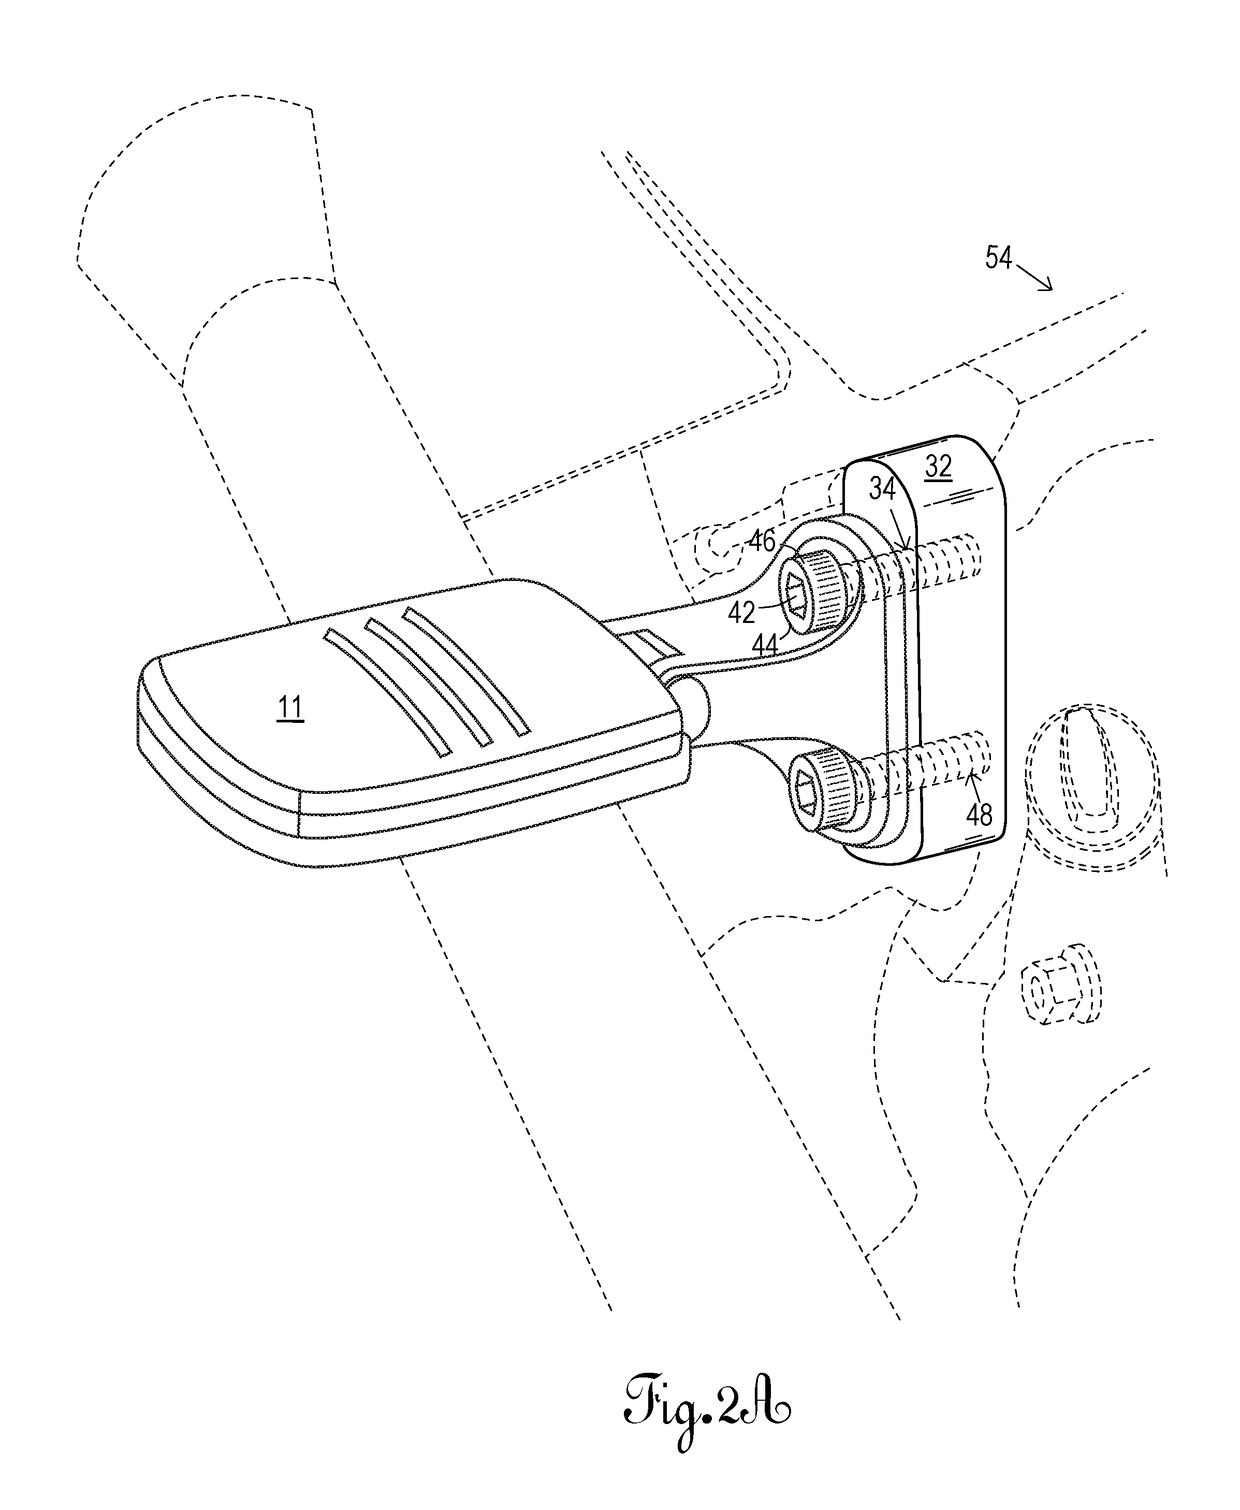 Method of mounting a flag holder mount onto a motorcycle